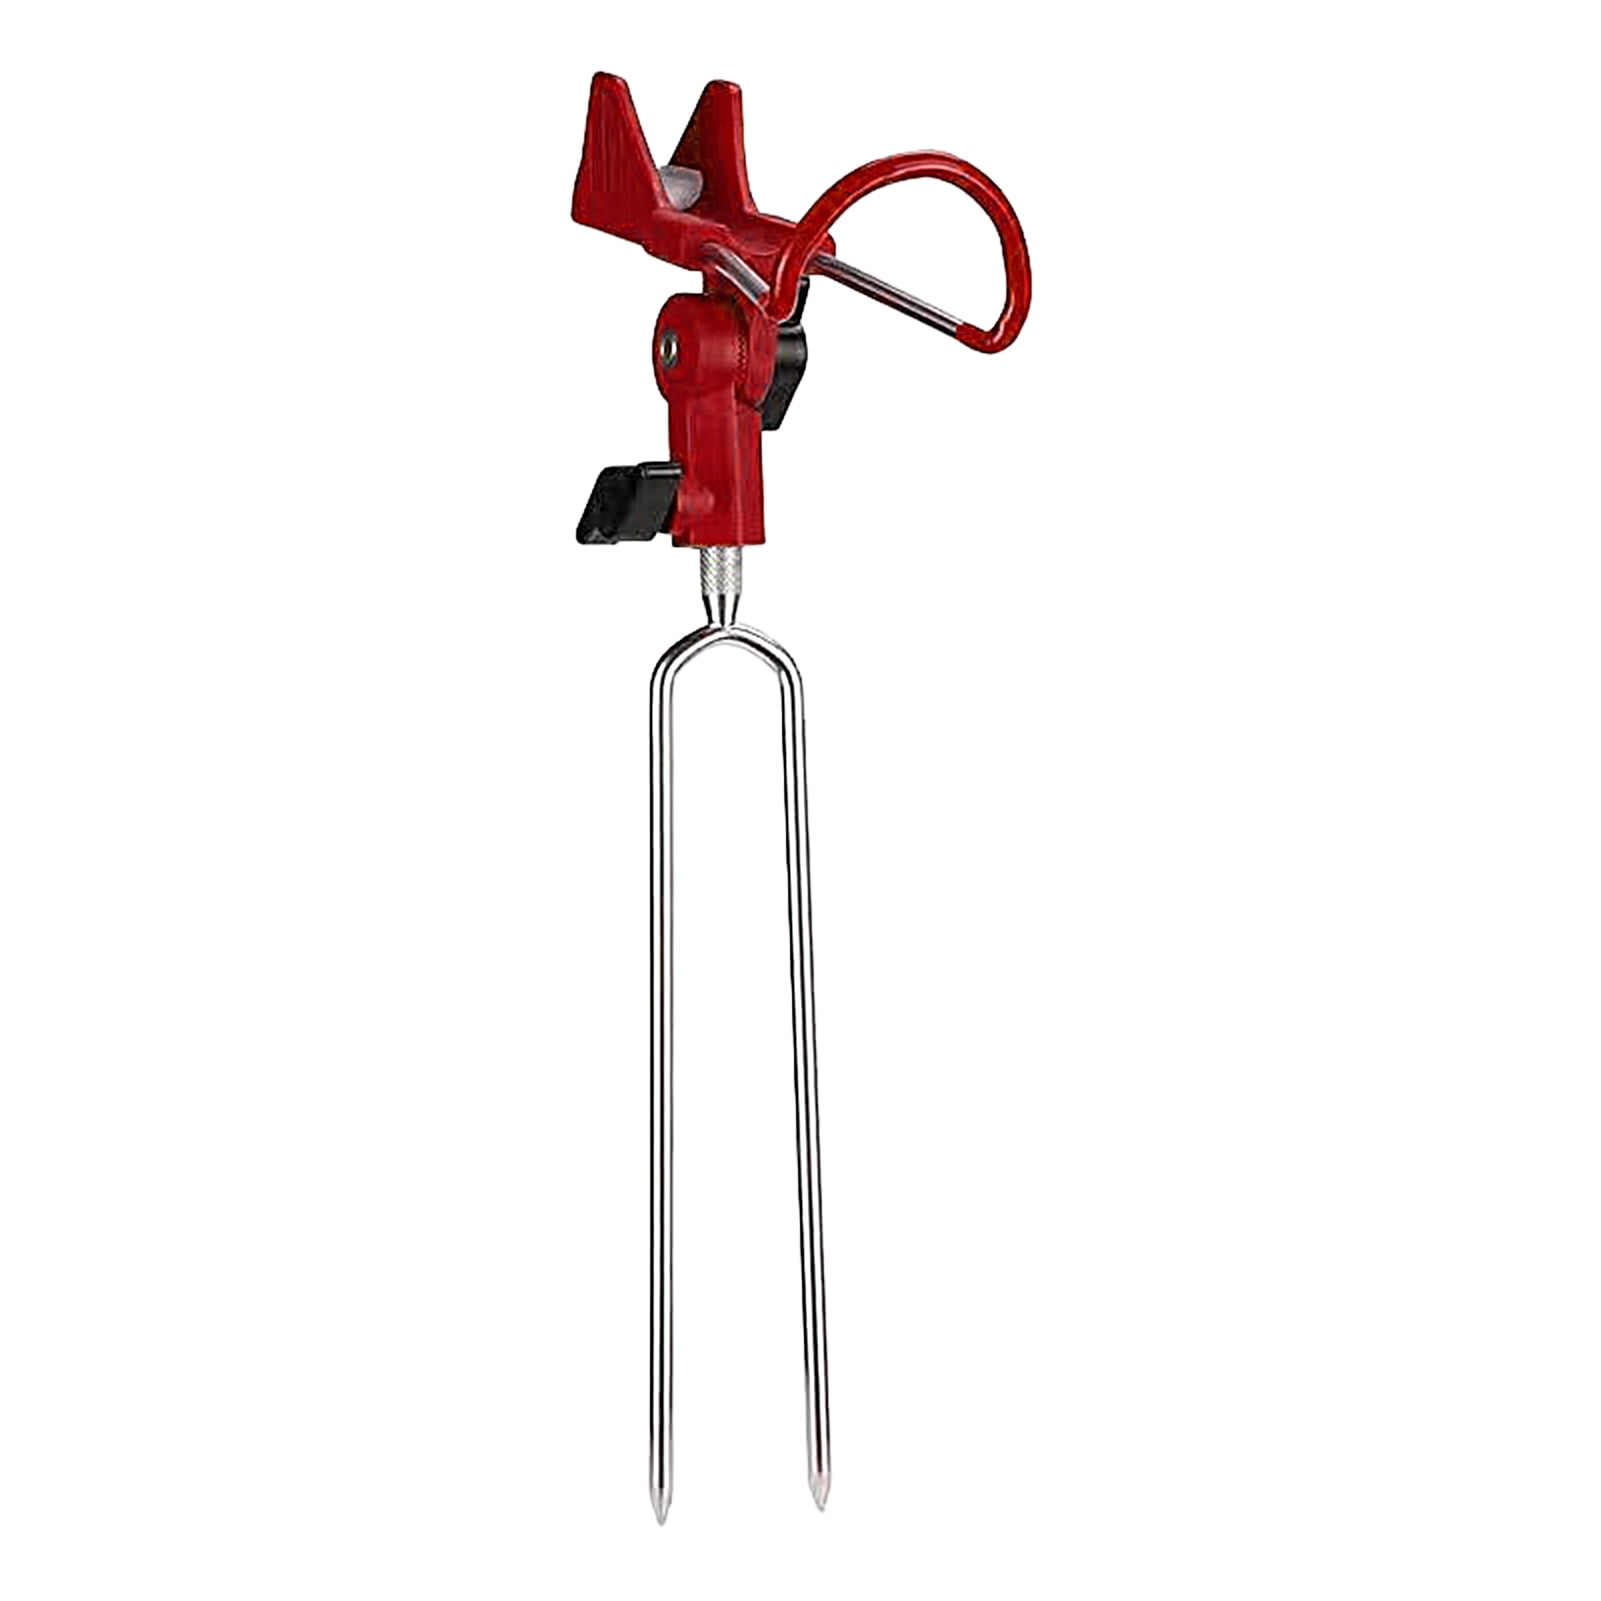 New Fishing Rod Stand Pole Holder Plug Insert Ground Portable Steel Tools  Tackle Support Telescopic Rack Adjustable Iron Tool Color: Red